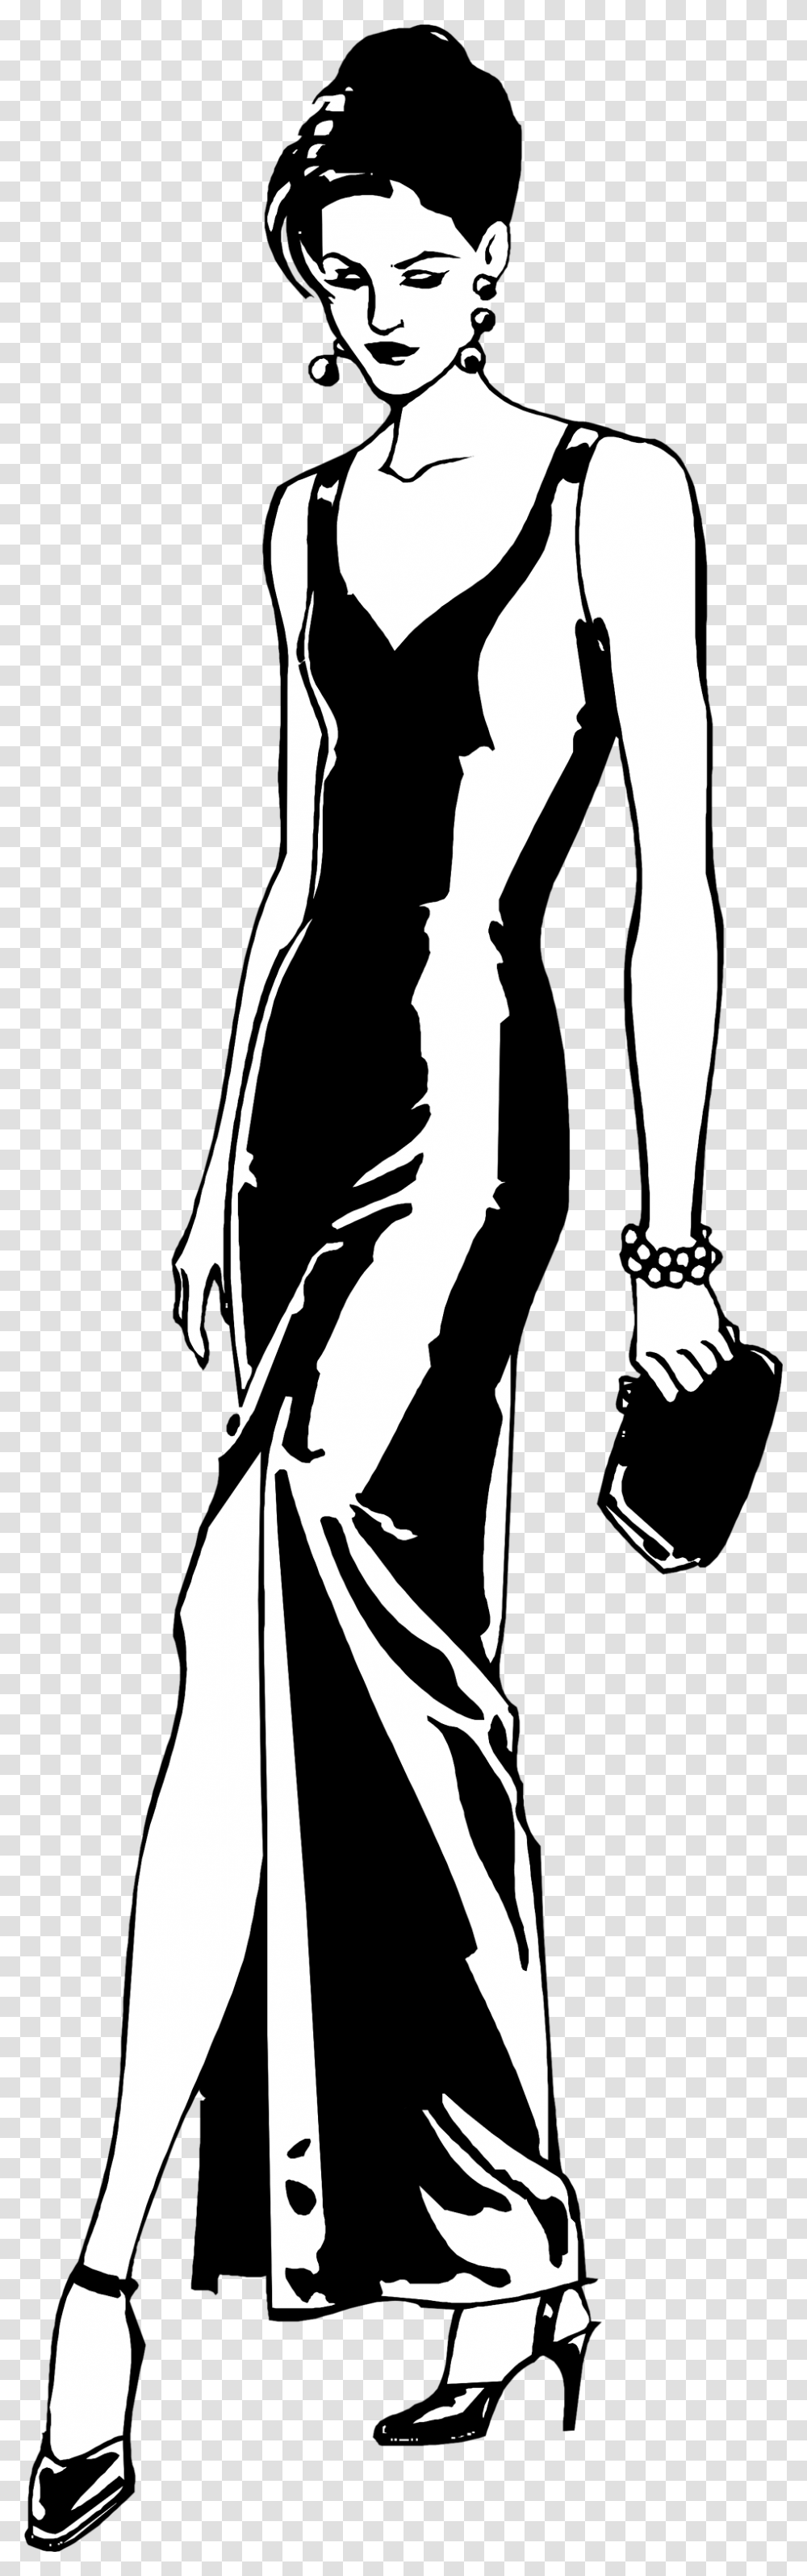 Free Sexy Silhouette Illustration Of Woman In White Dress, Hand, Person, Human, Holding Hands Transparent Png